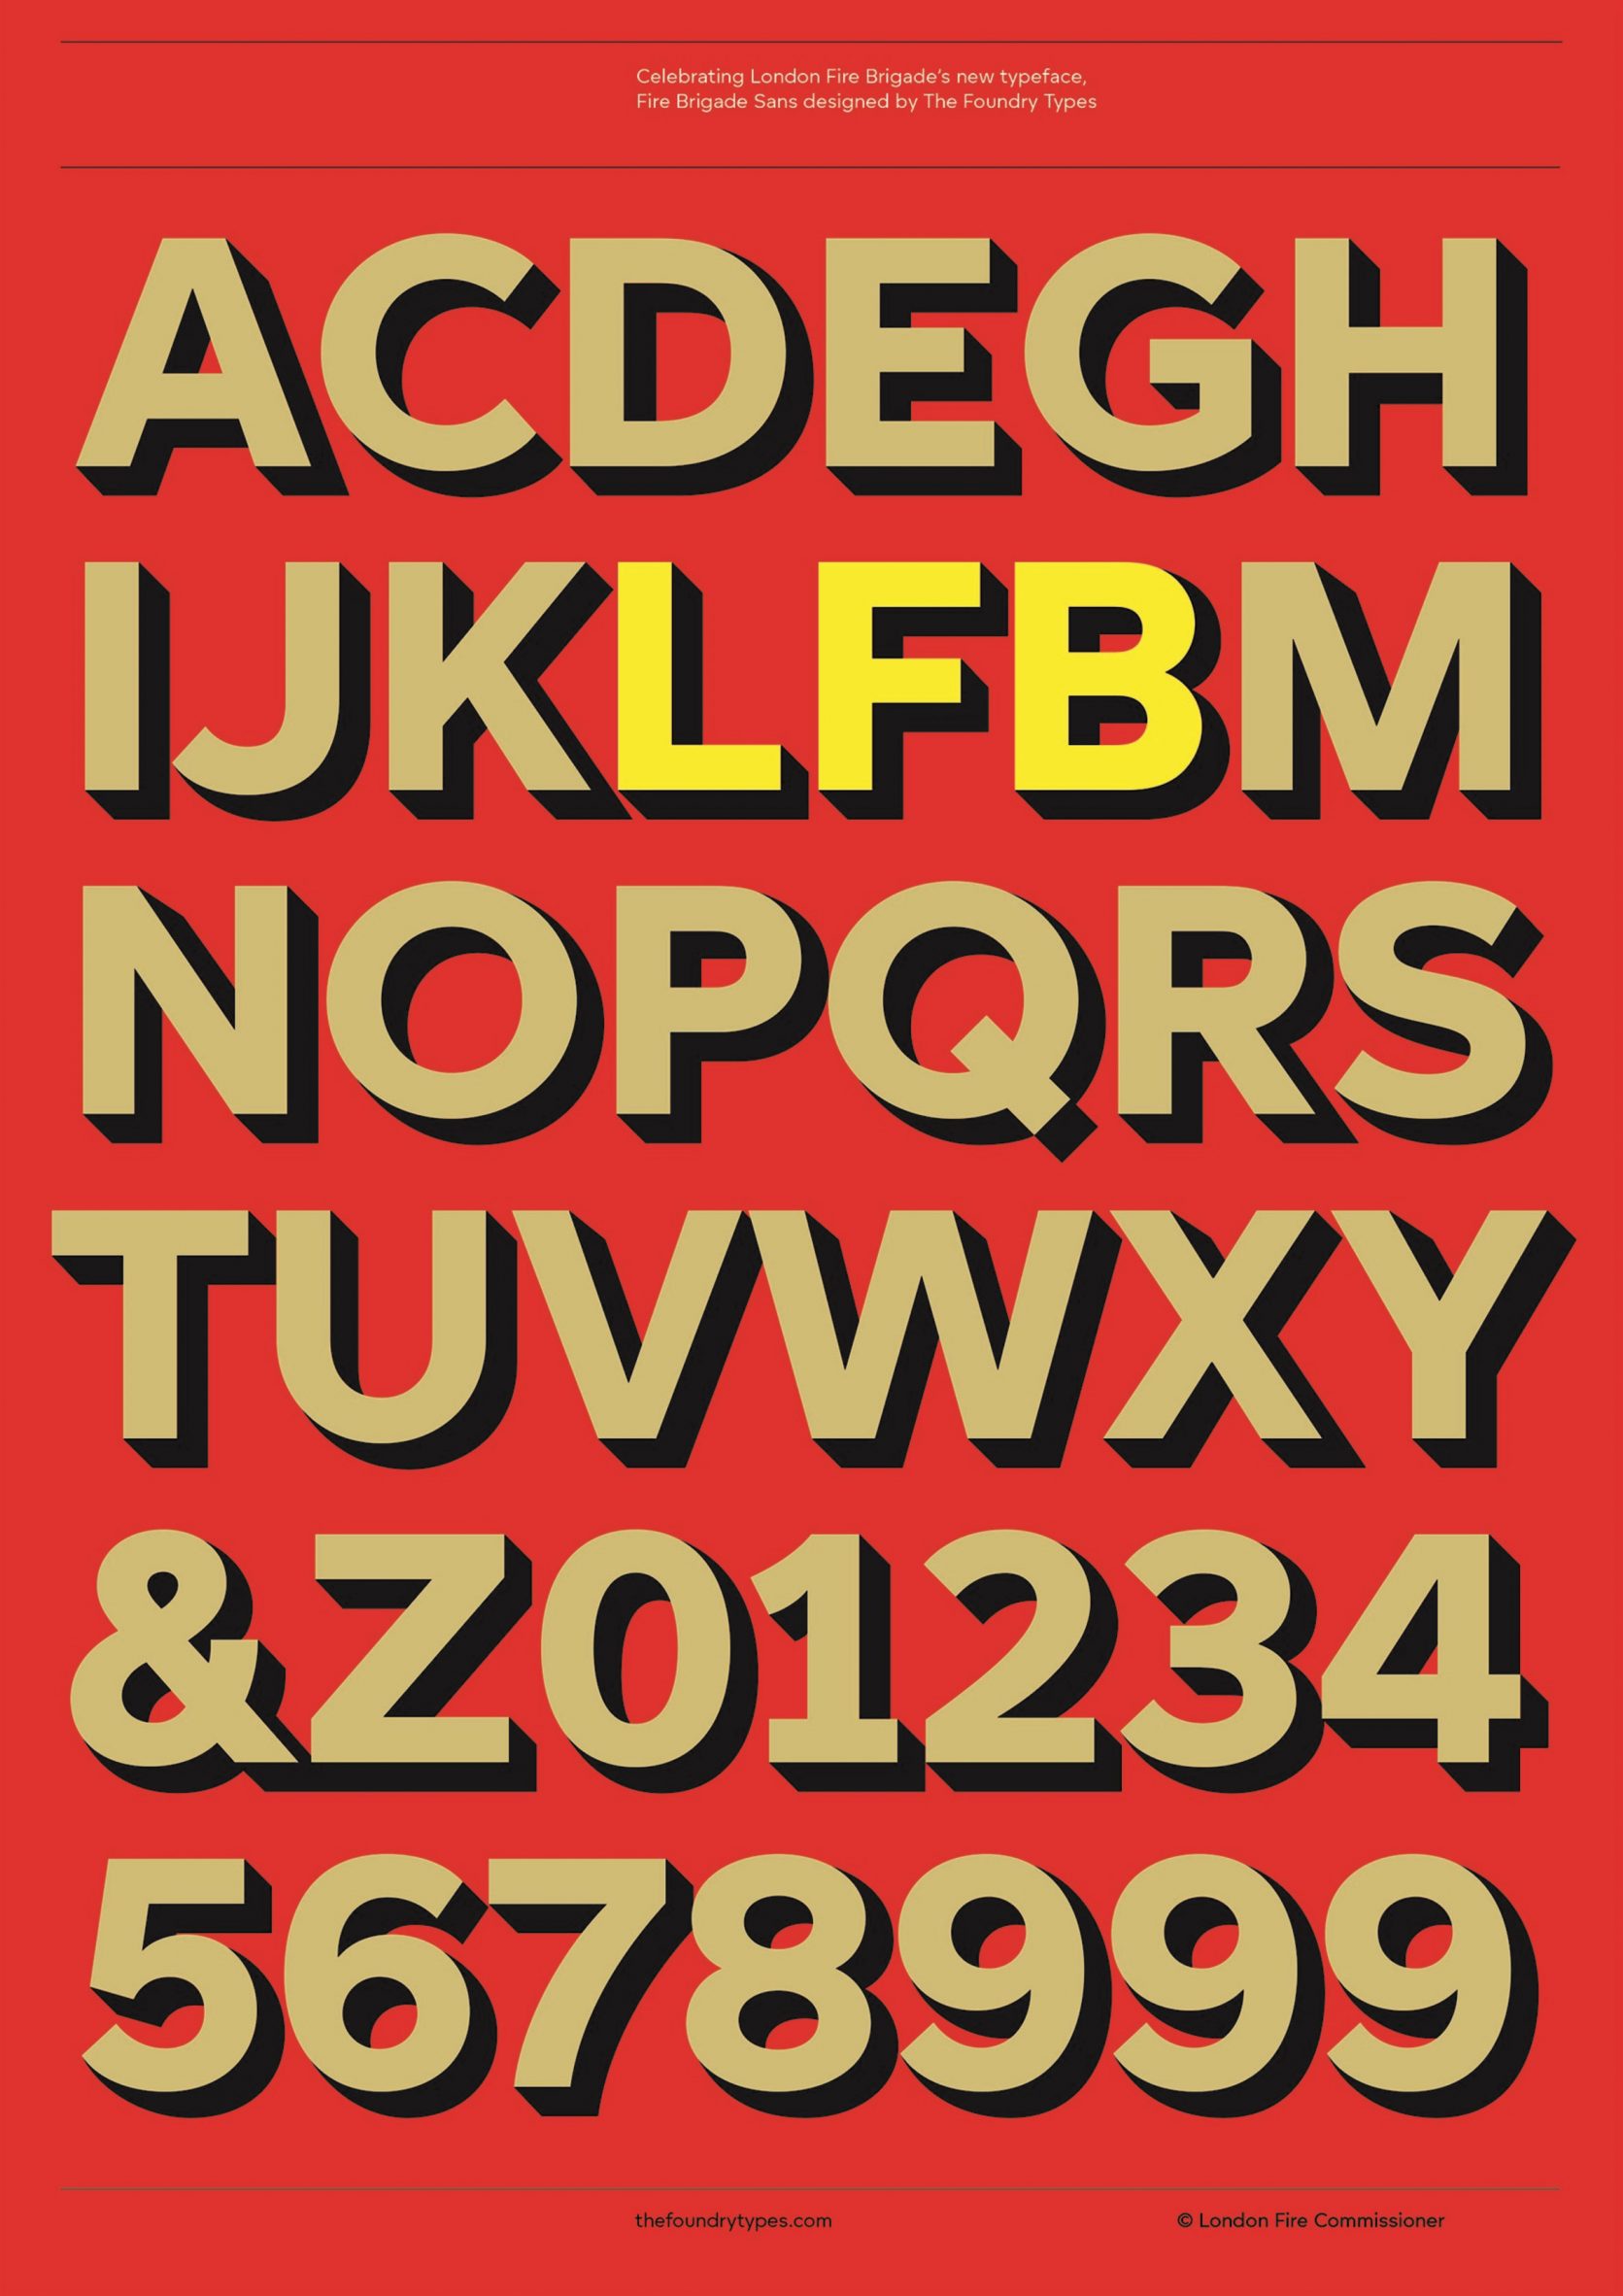 Red poster with London Fire Brigade's new typeface in gold lettering